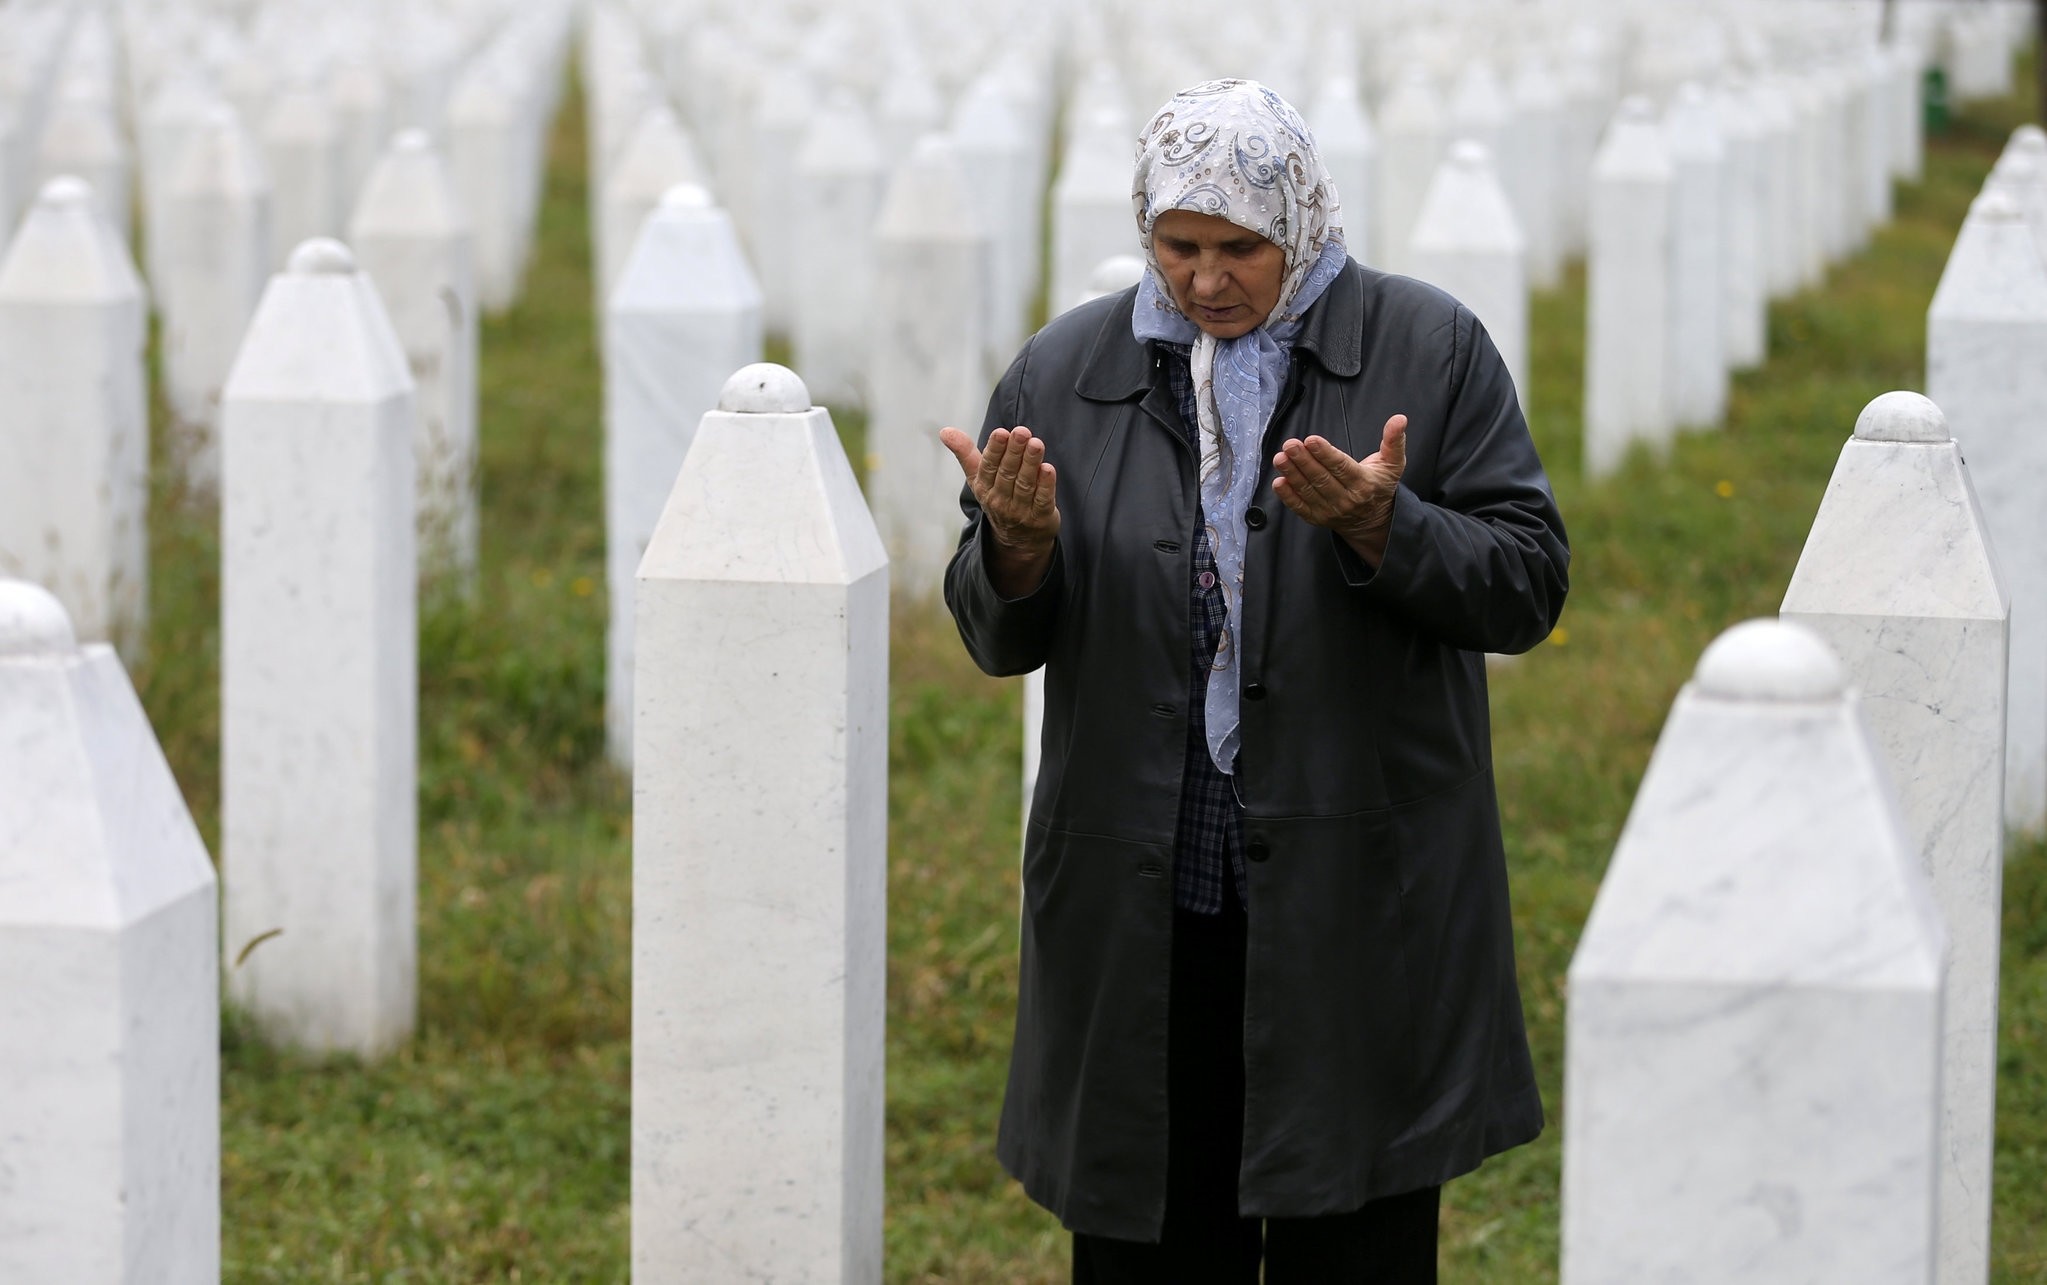 Hatidza Mehmedovic prays near the graves of her two sons and husband in Potocari near Srebrenica, Bosnia and Herzegovina, October 17, 2016. (Reuters Photo)